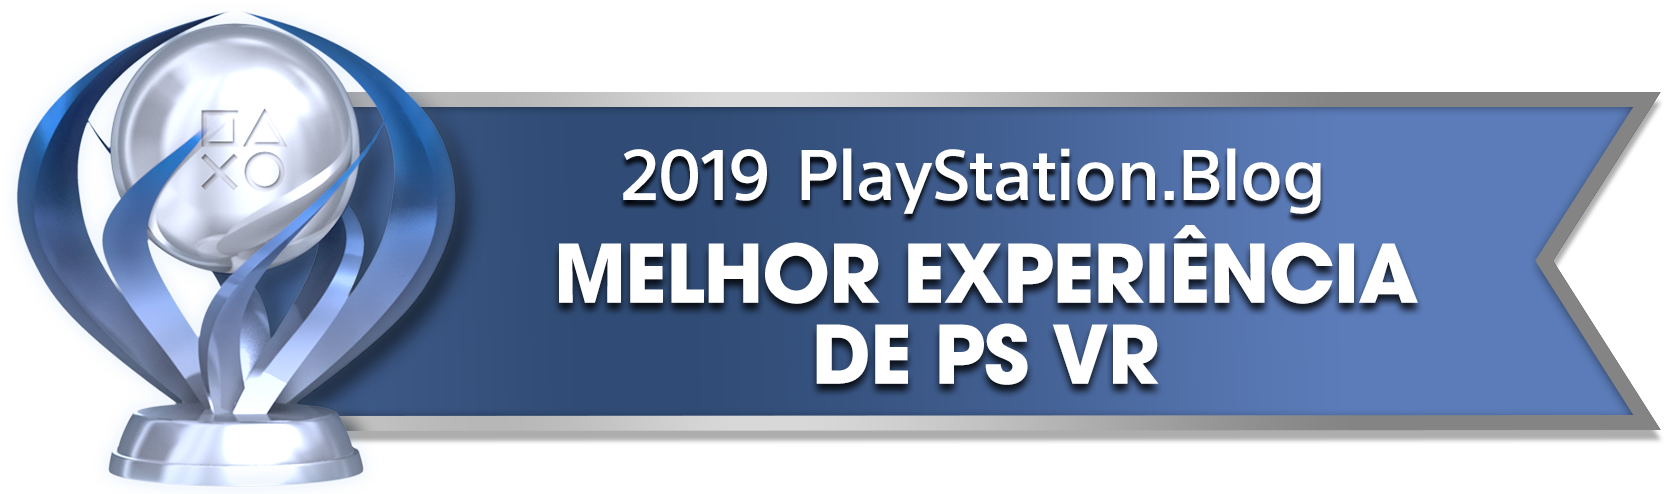 PS Blog Game of the Year 2019 - Best PS VR Experience - 1 - Platinum